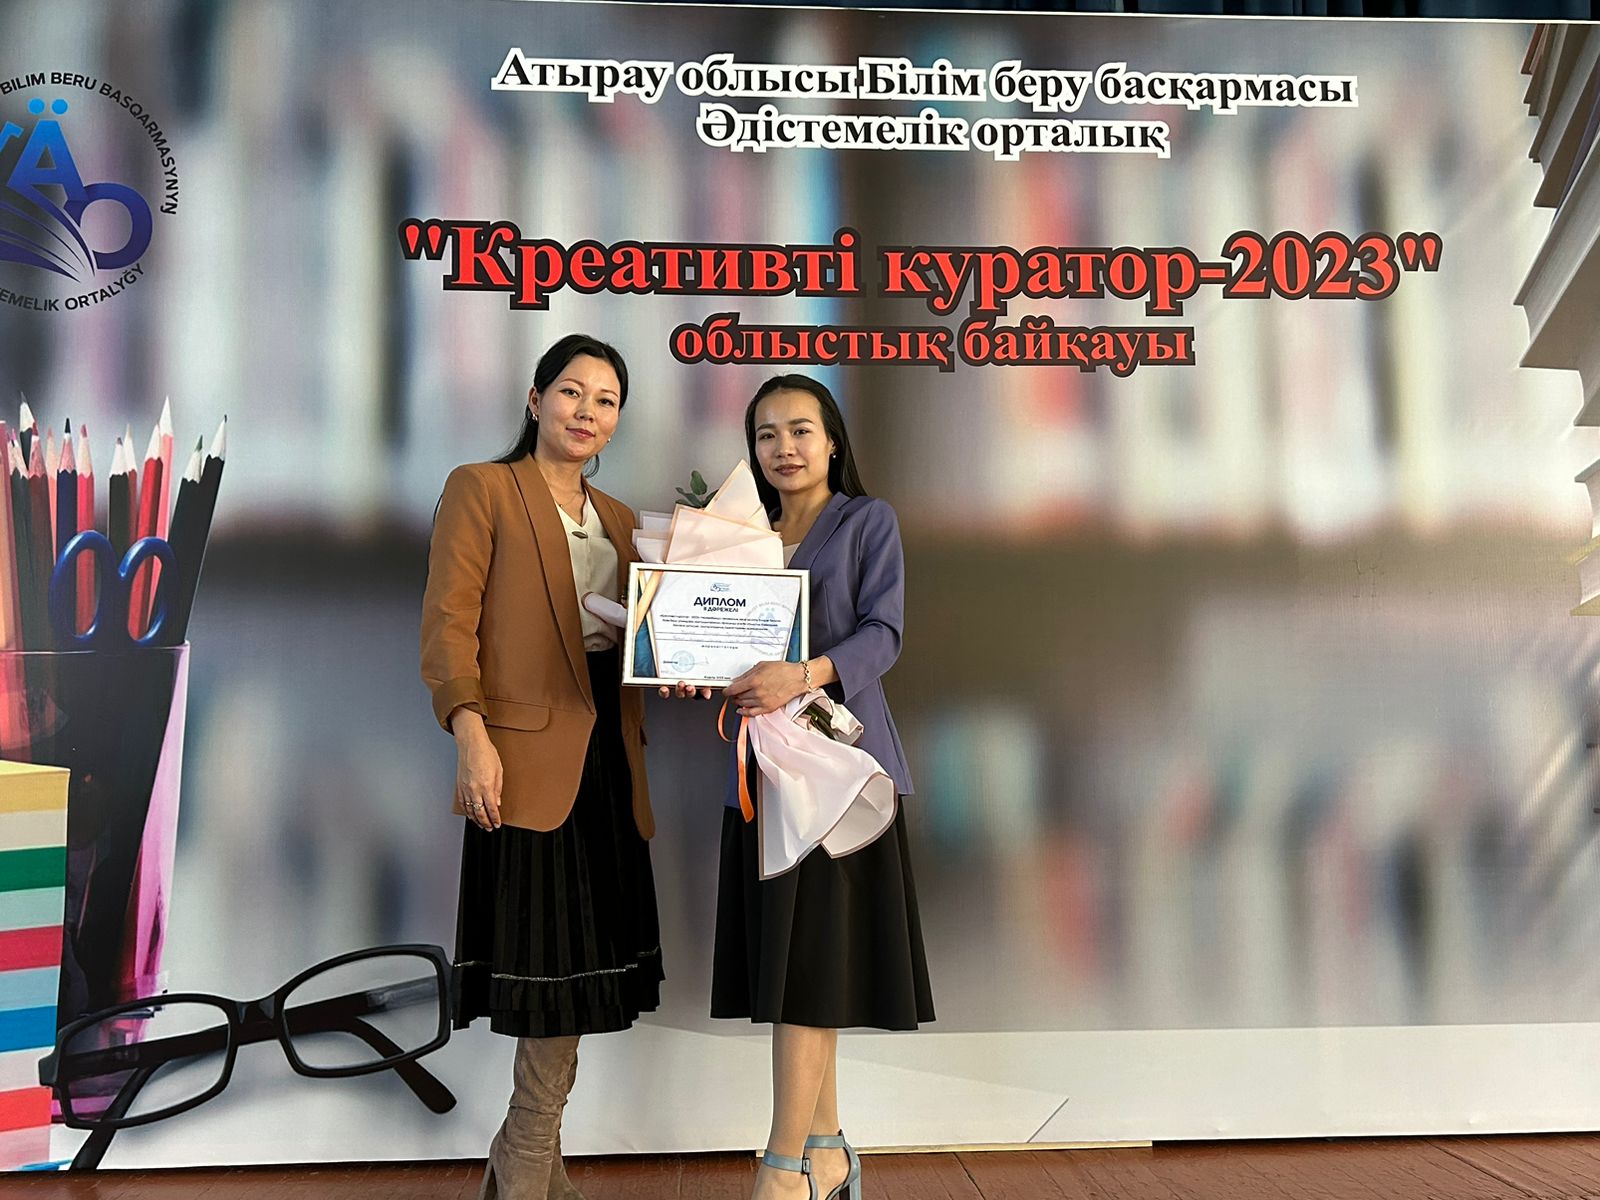 You are currently viewing Креативті куратор 2023